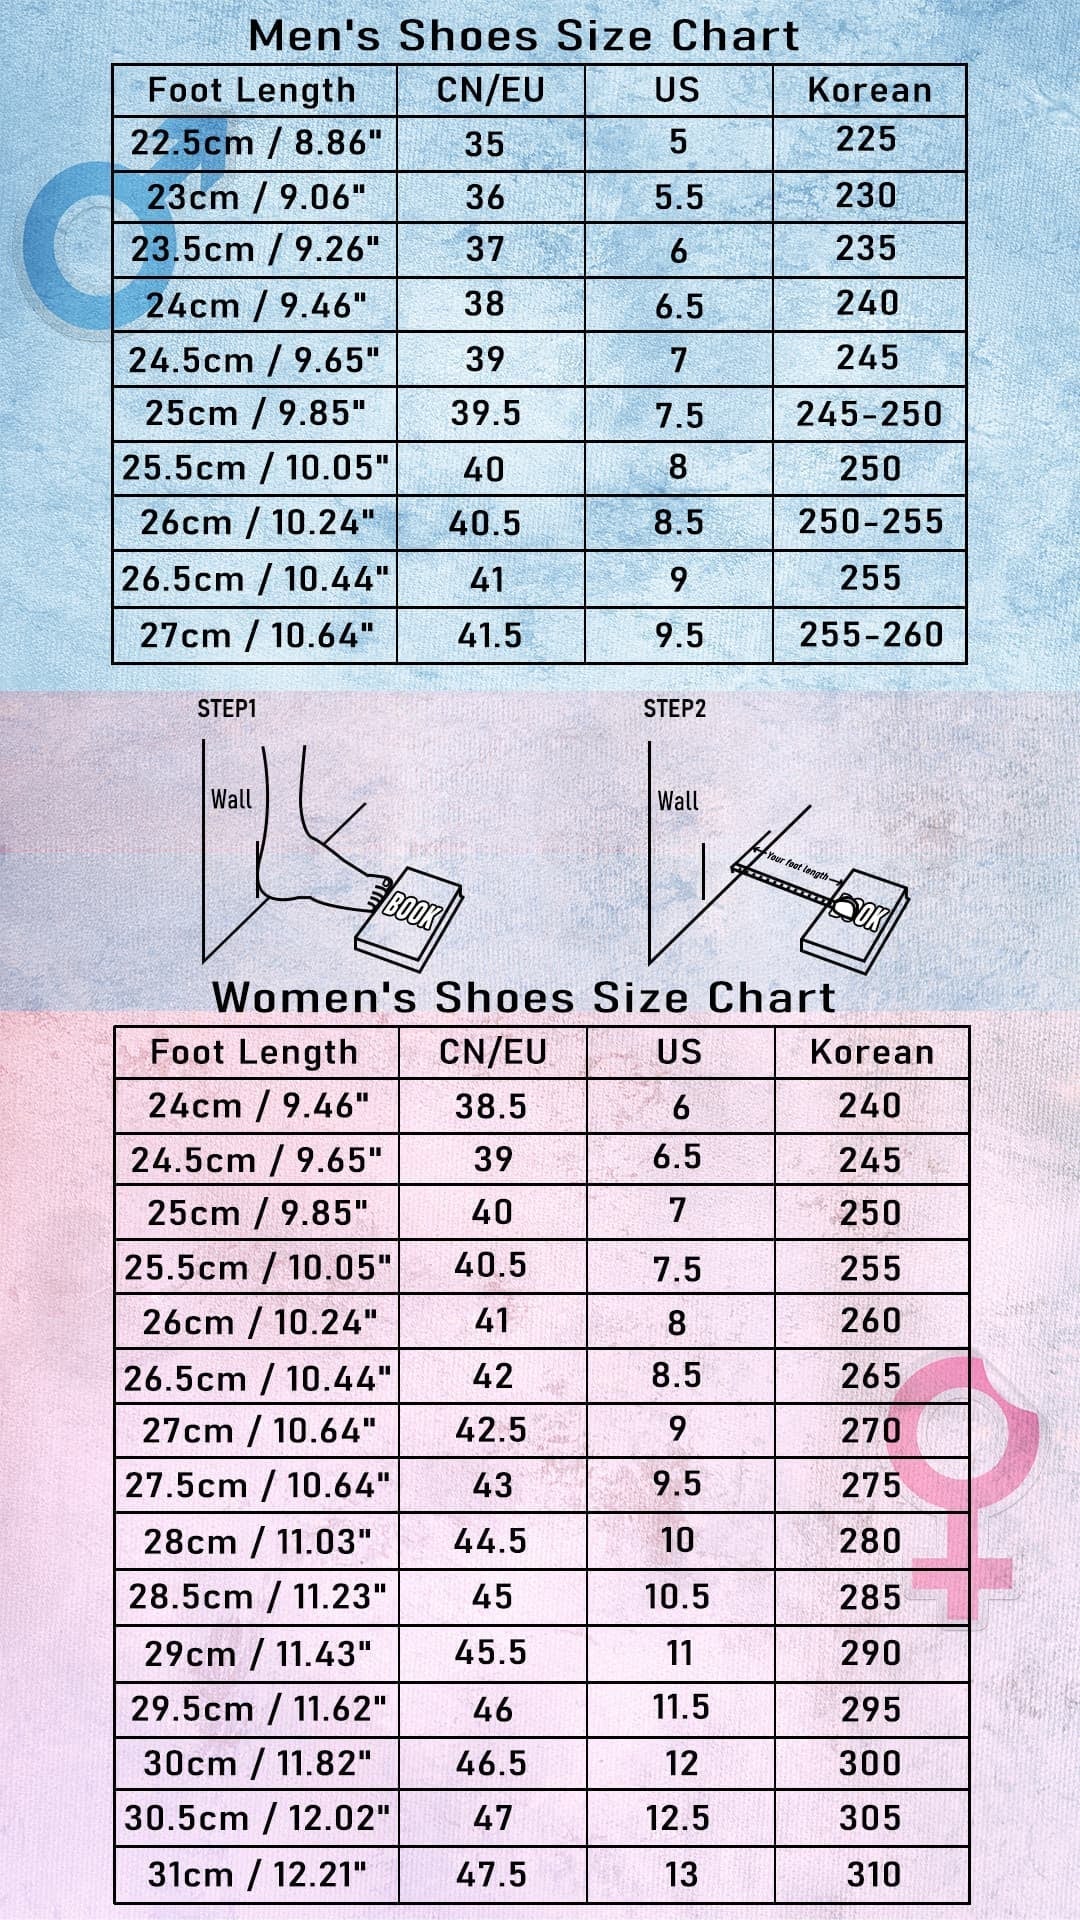 xakxx Women's Sandals Summer Female Slippers Flat Woman Peep-toe Comfort Slip-on Casual Shoes Mujer Slingback